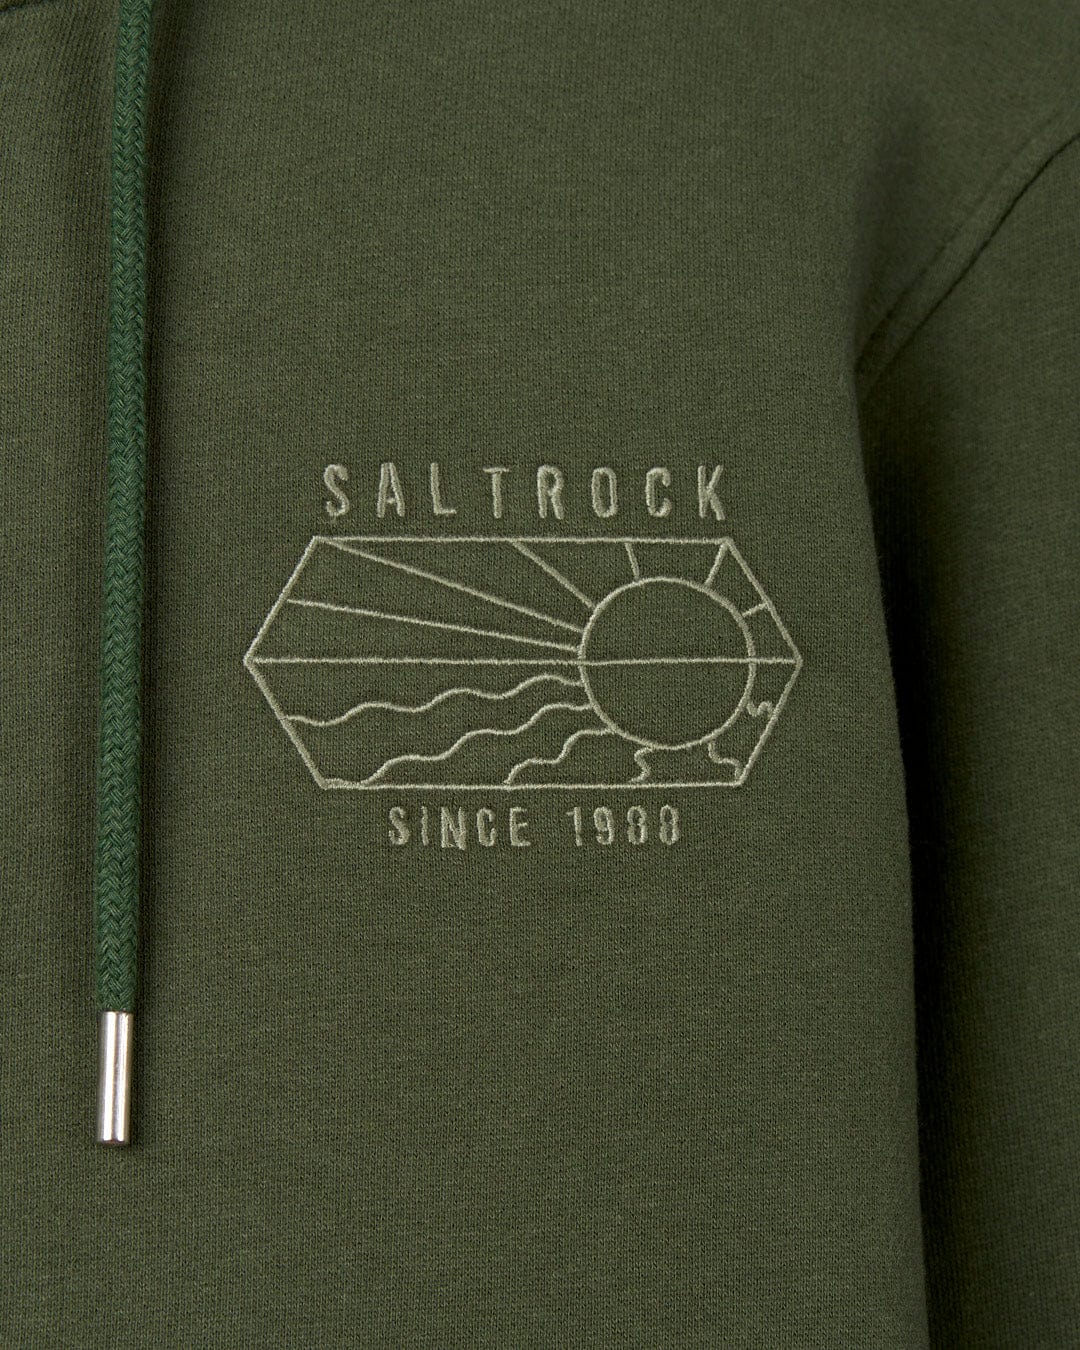 Close-up of a green Saltrock Vantage Outline - Recycled Mens Zip Hoodie - Dark Green with the "Saltrock since 1993" embroidered branding on it, next to a zipper with a metal pull.